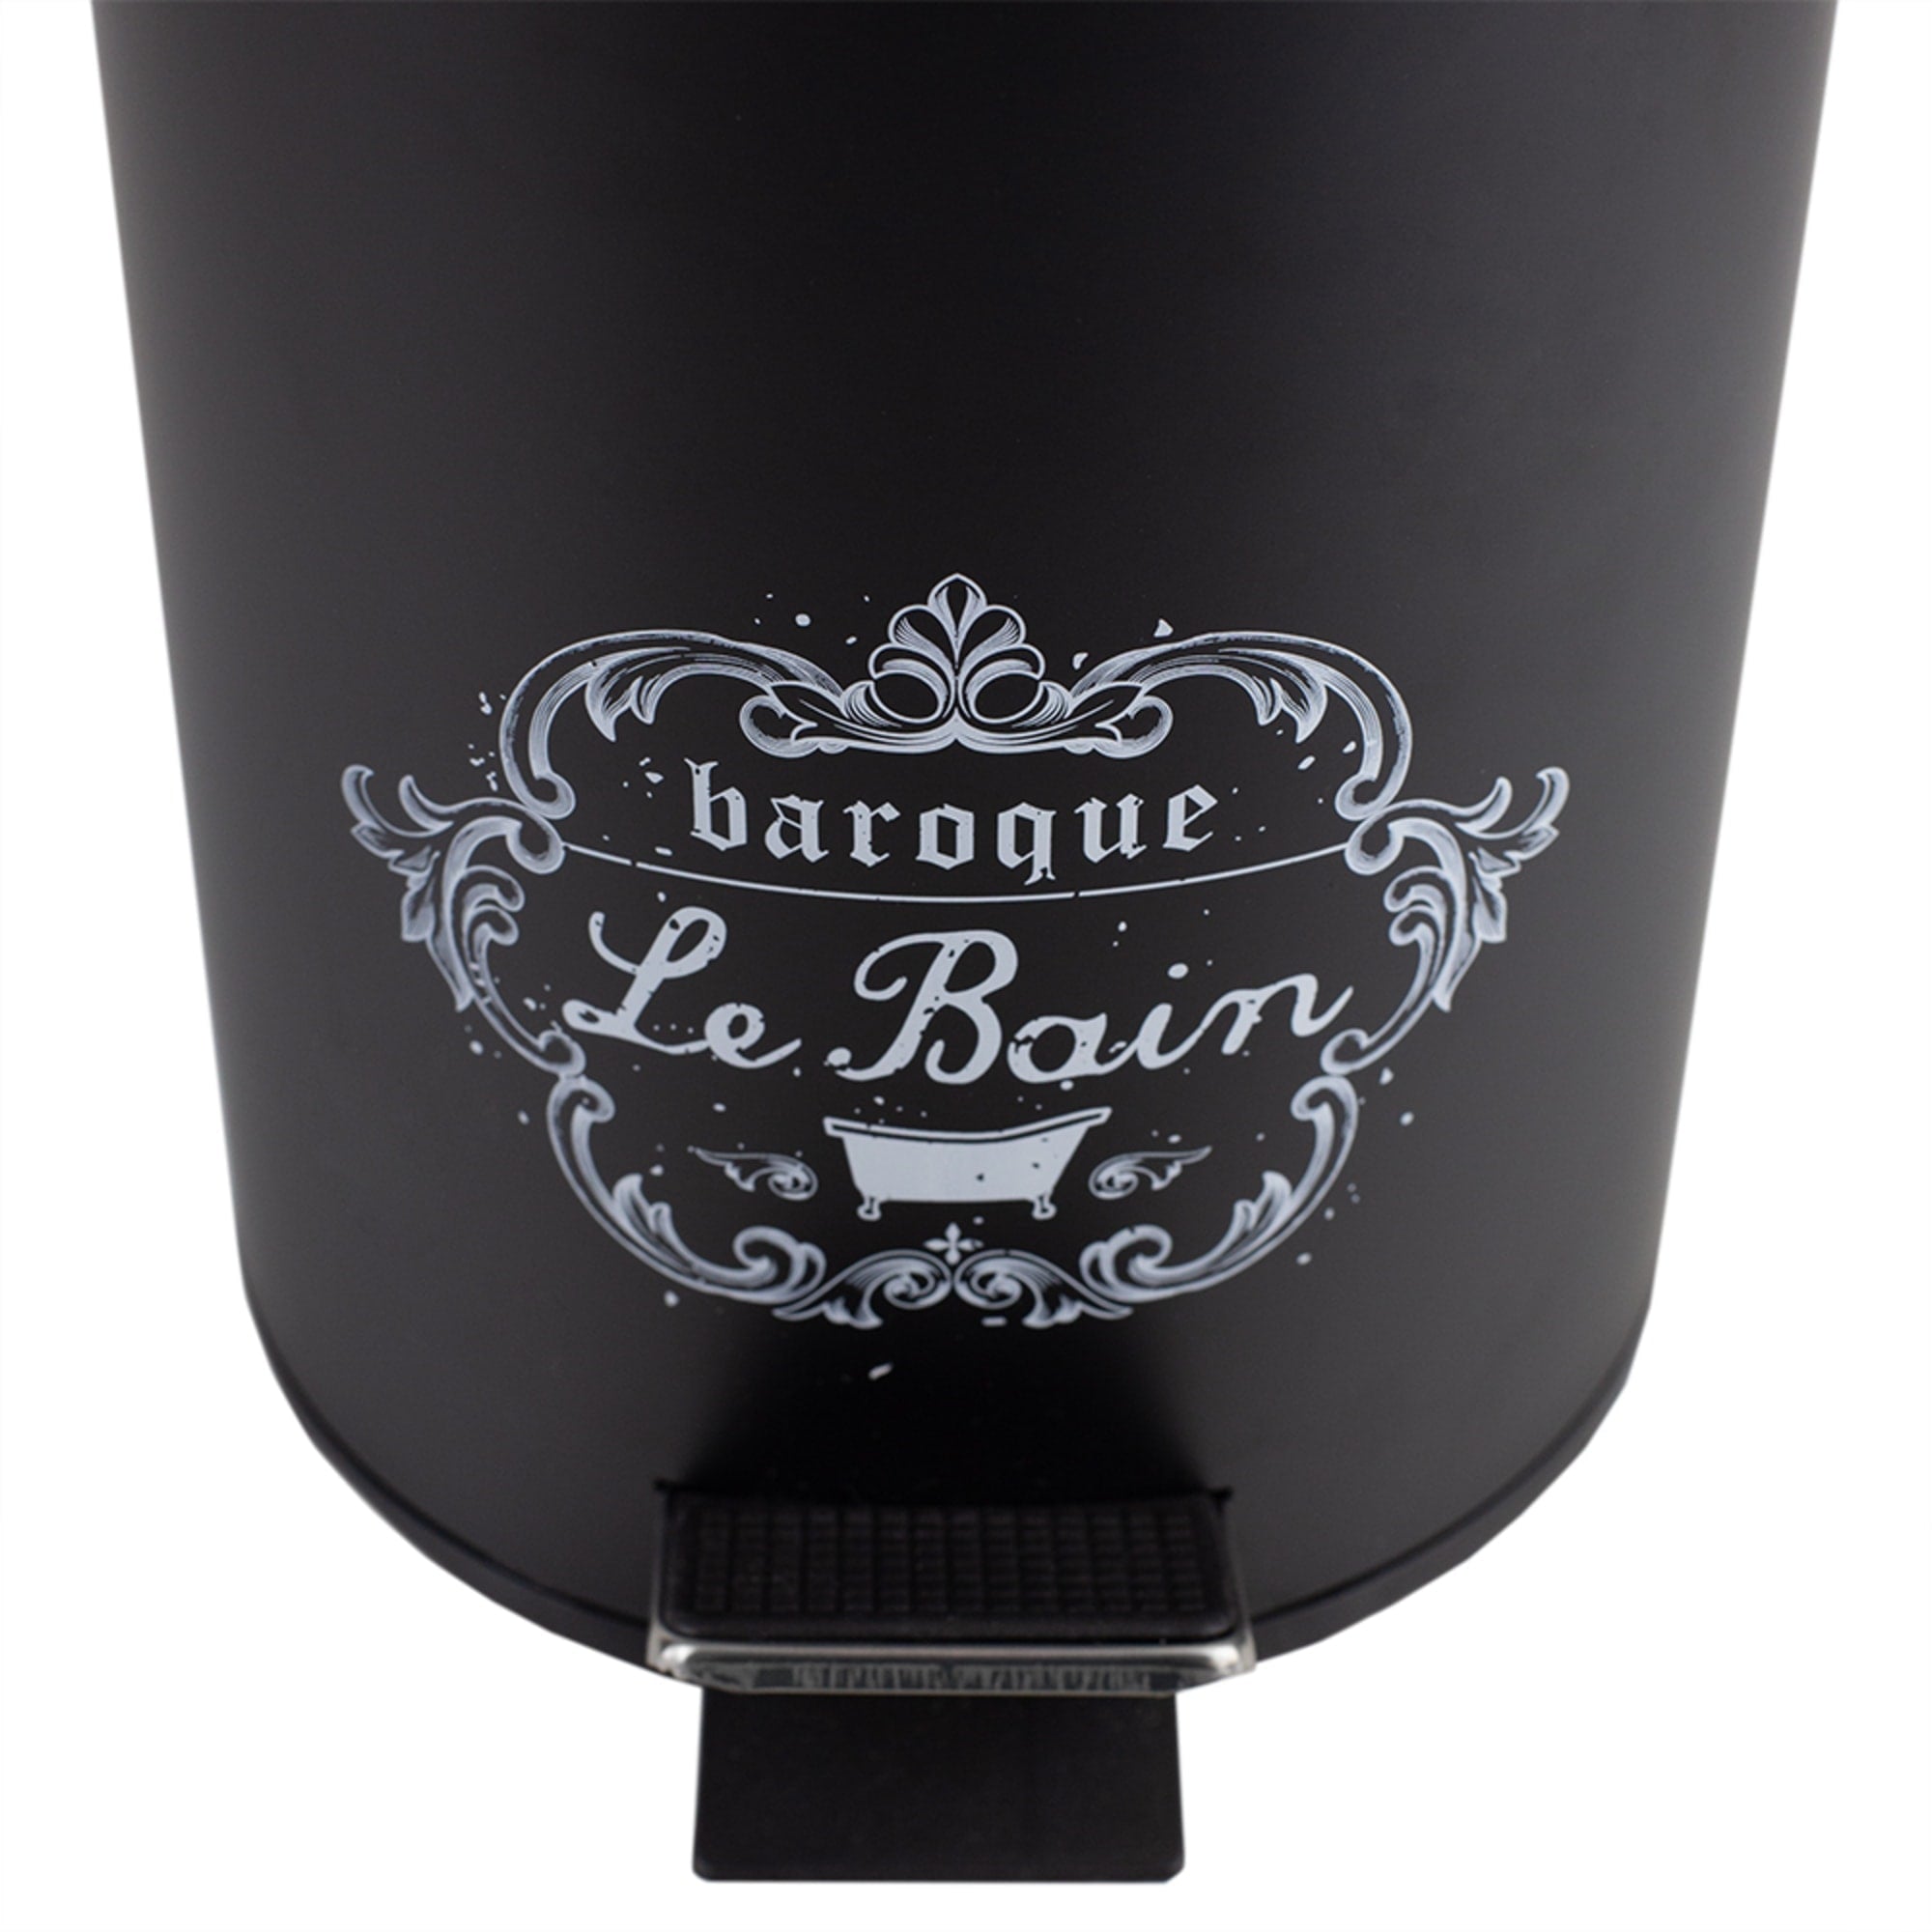 Home Basics 3 LT Paris Le Bain Step On  Steel Waste Bin with Carrying Handle, Black $8.00 EACH, CASE PACK OF 6